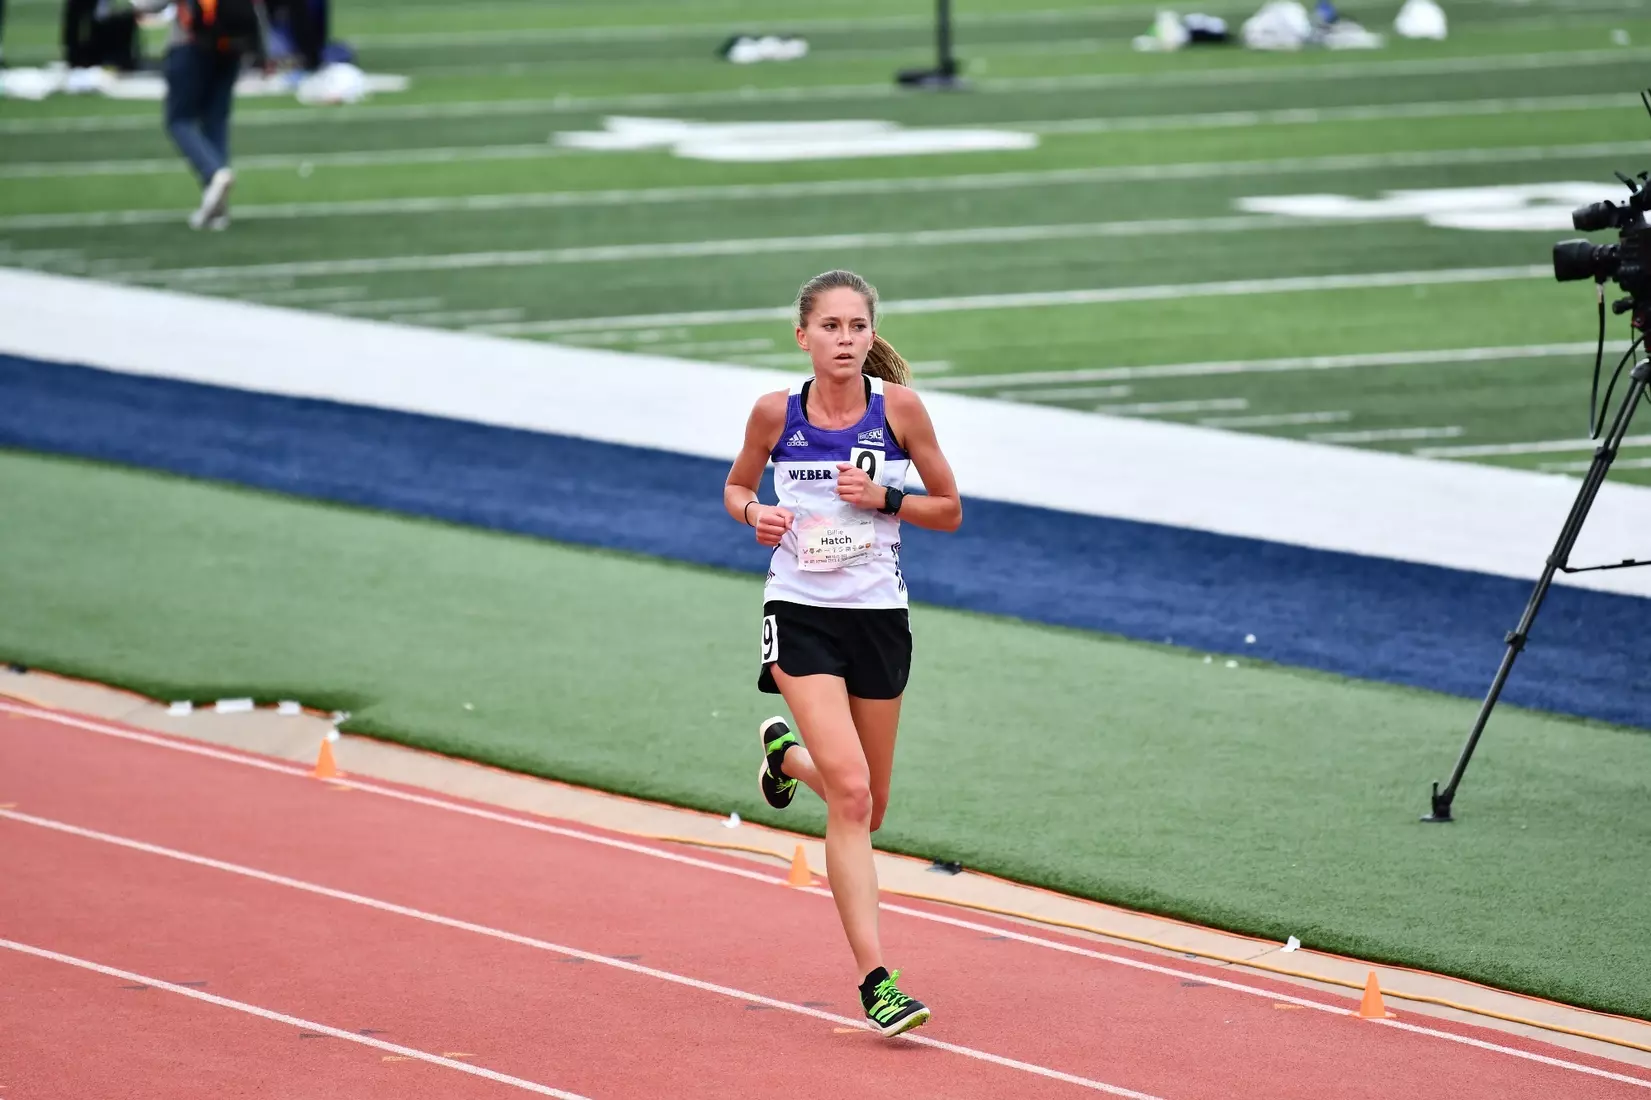 Distance runner Billie Hatch running on the track at a Womens Track and Field event.